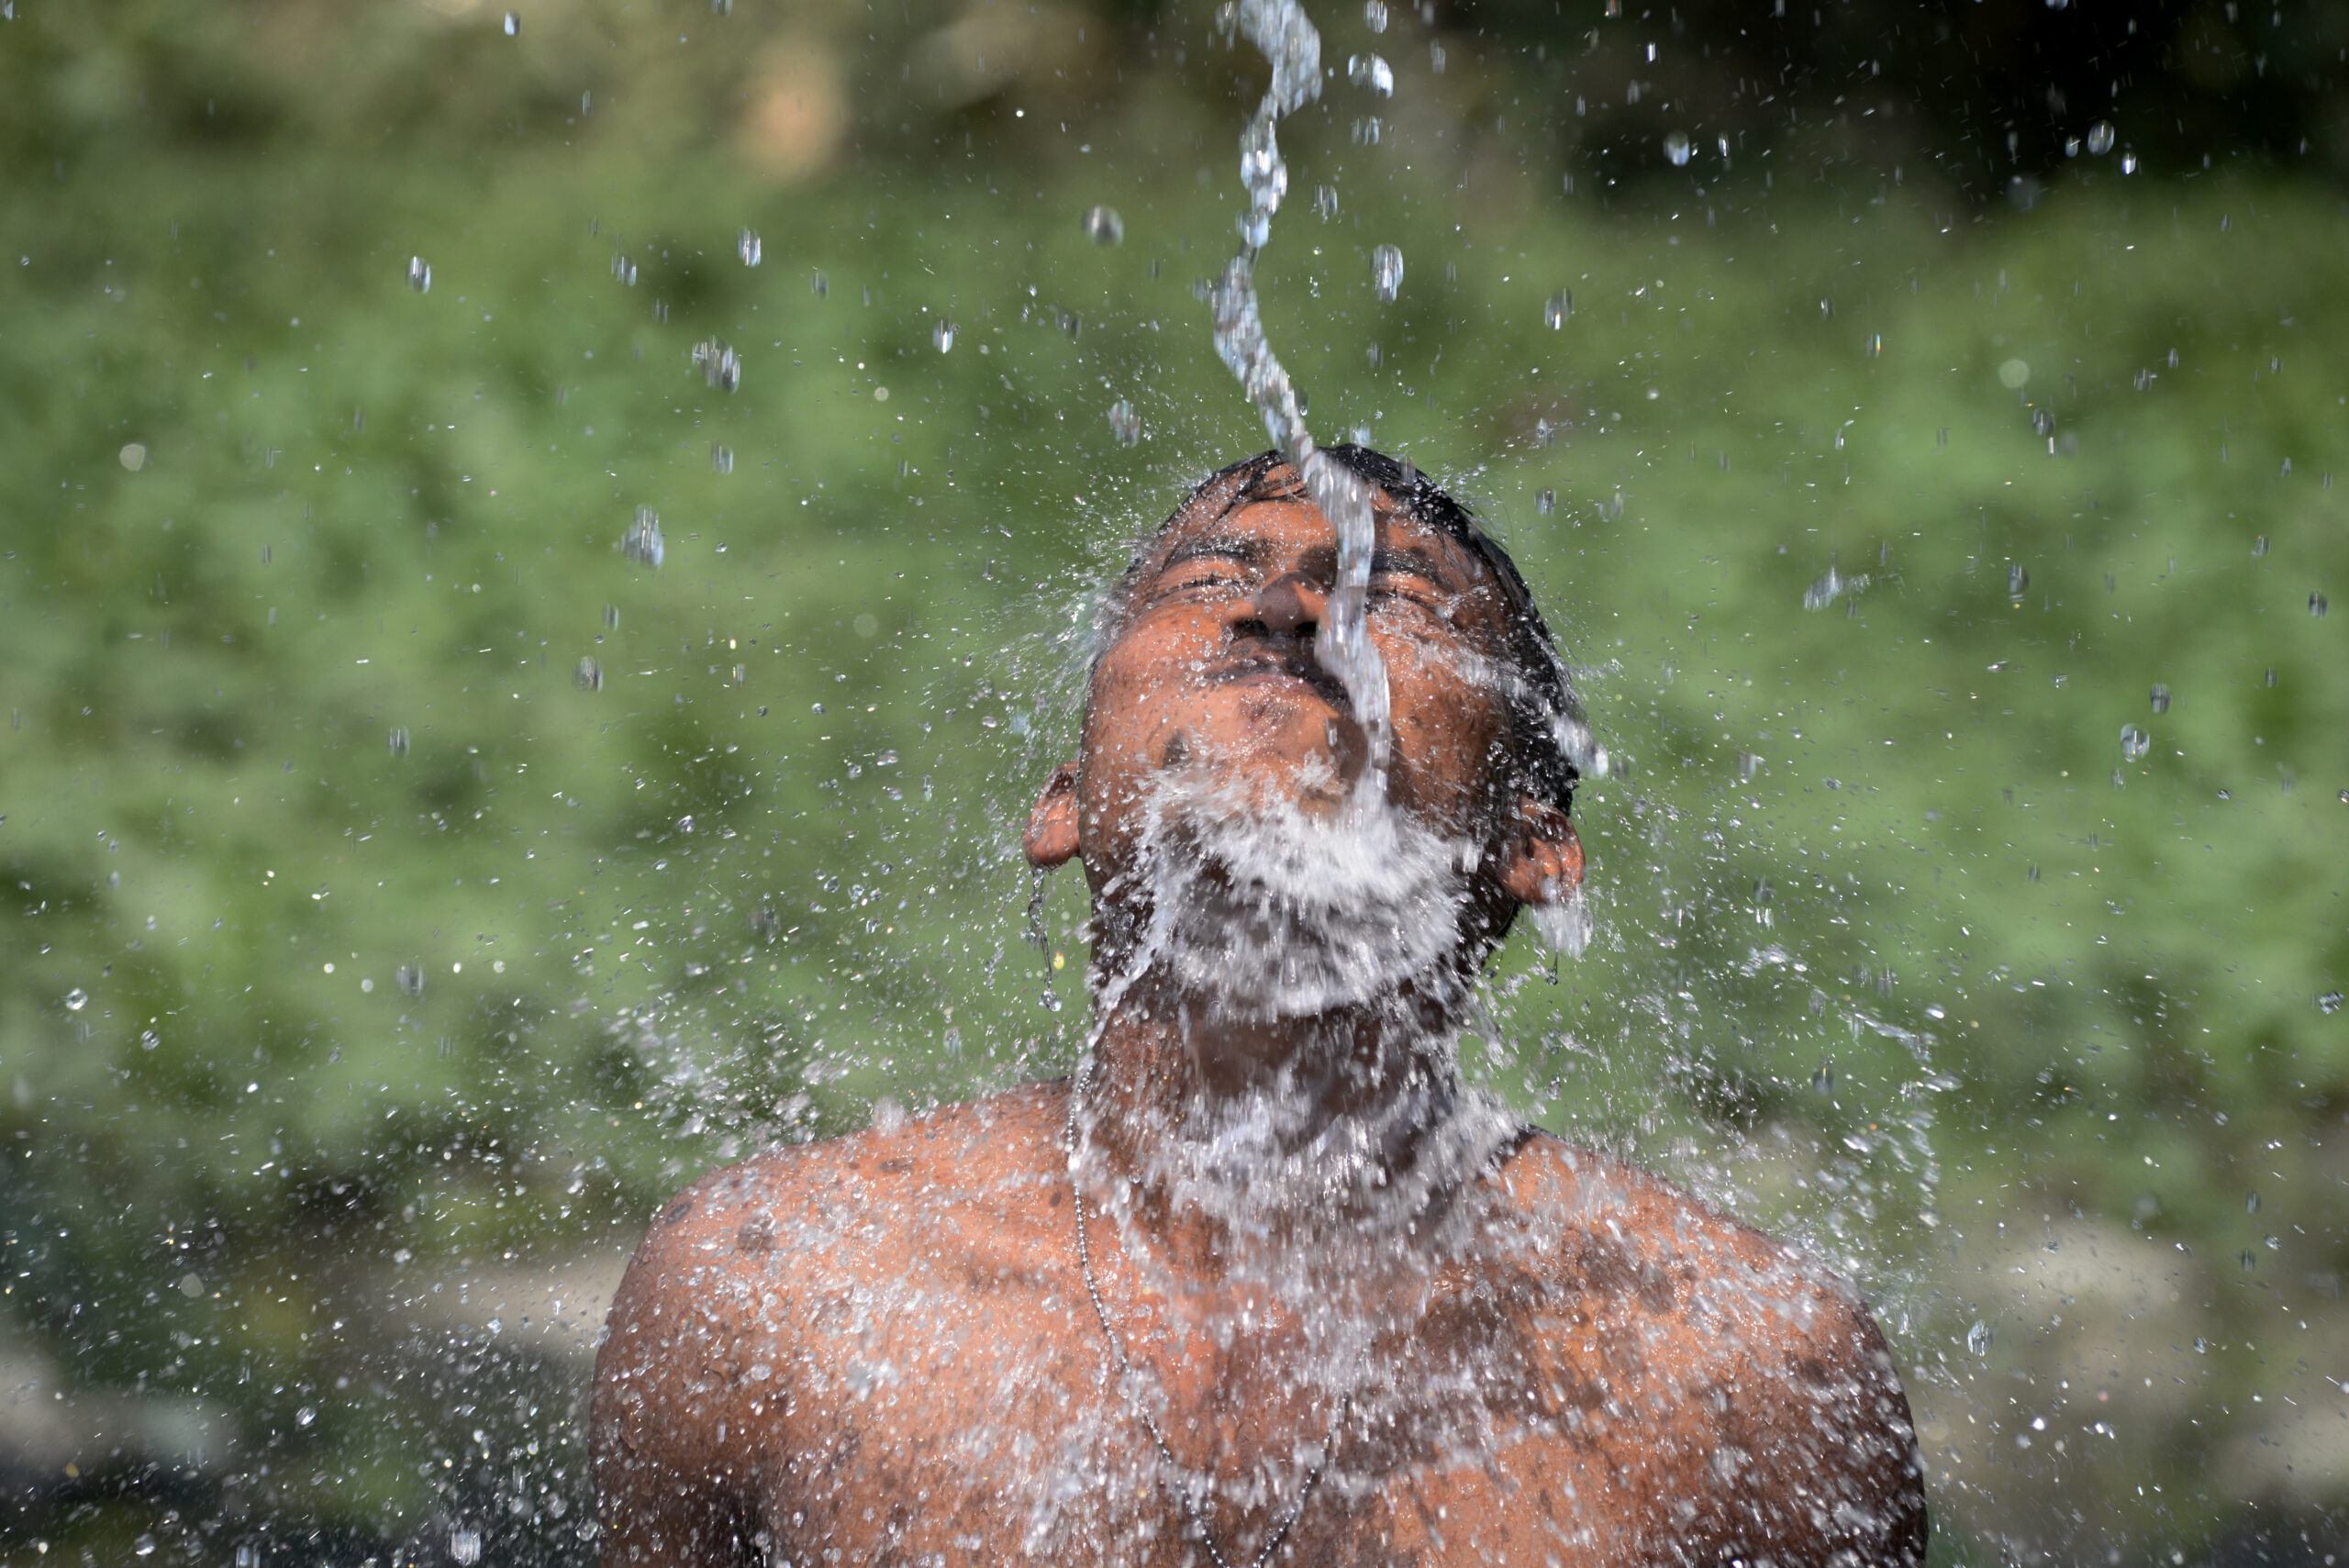 Heat Waves In India: Impacts, Risks and Action